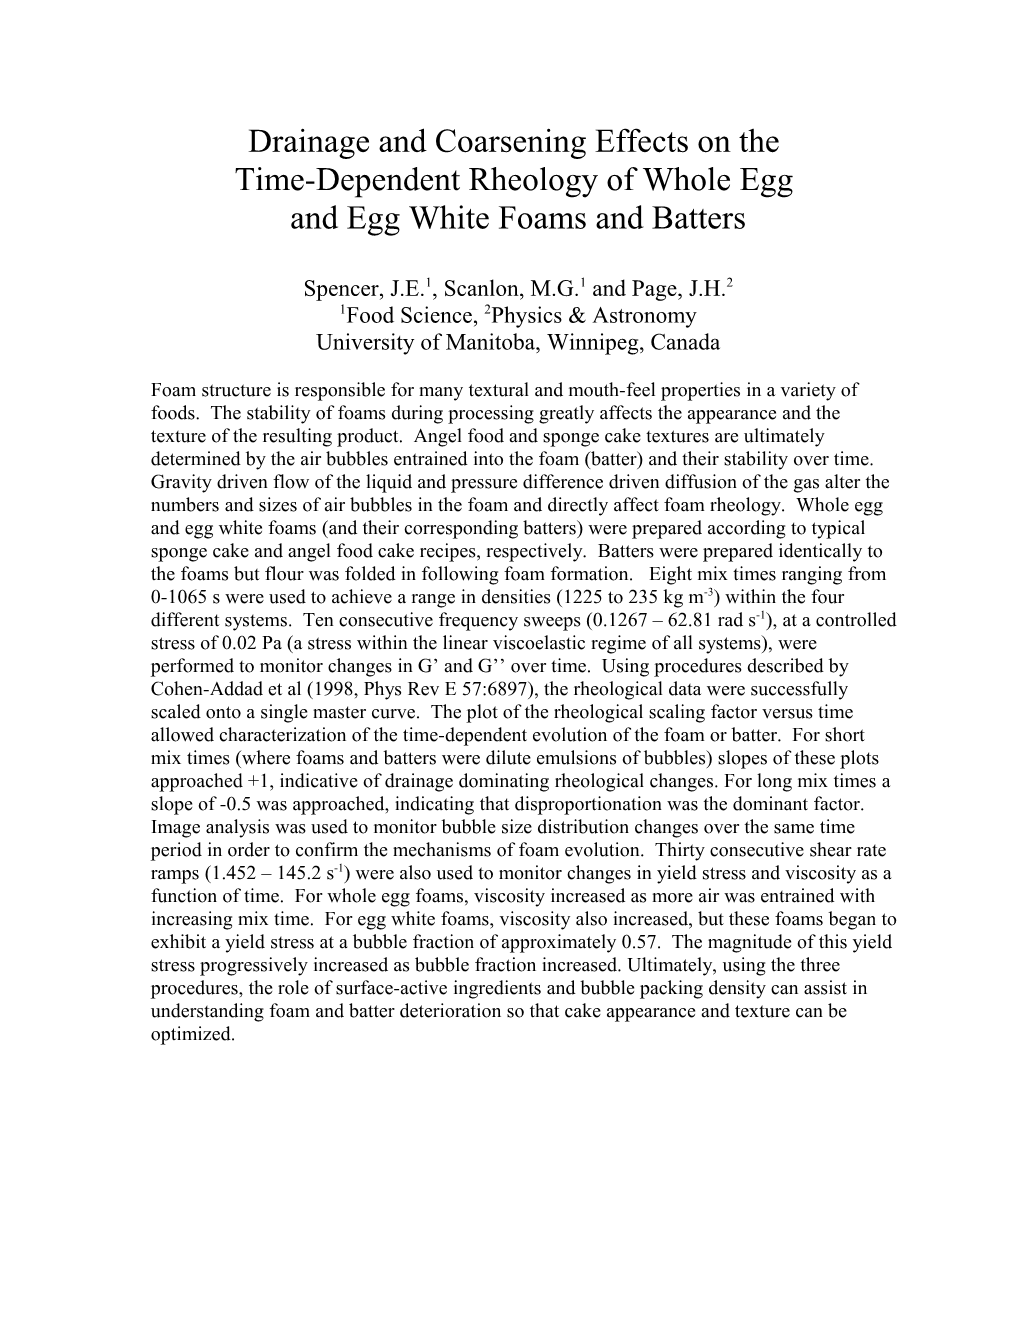 Structural Effects on the Rheology of Whole Egg and Egg White Foams and Batters